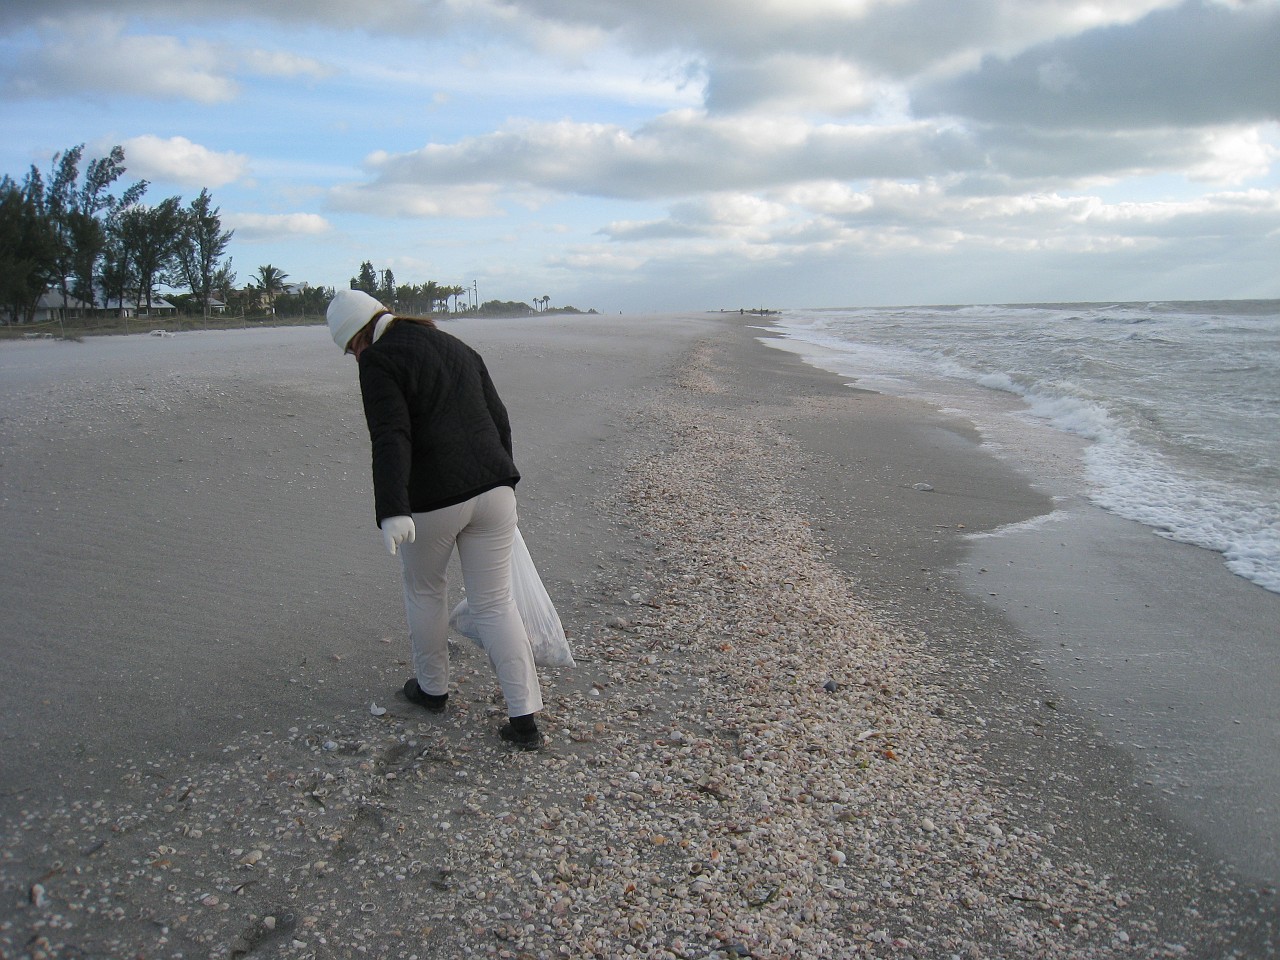 Vacation 2007-12 - Sanibel Island 0076.jpg - Our vacation for 2007-08 to Florida included a side trip to Sanibel Island. The main attraction here is "shelling", known as "The Sanibel Stoop" named for people bending over to pick up shells. It was a cold and blustery day at best!